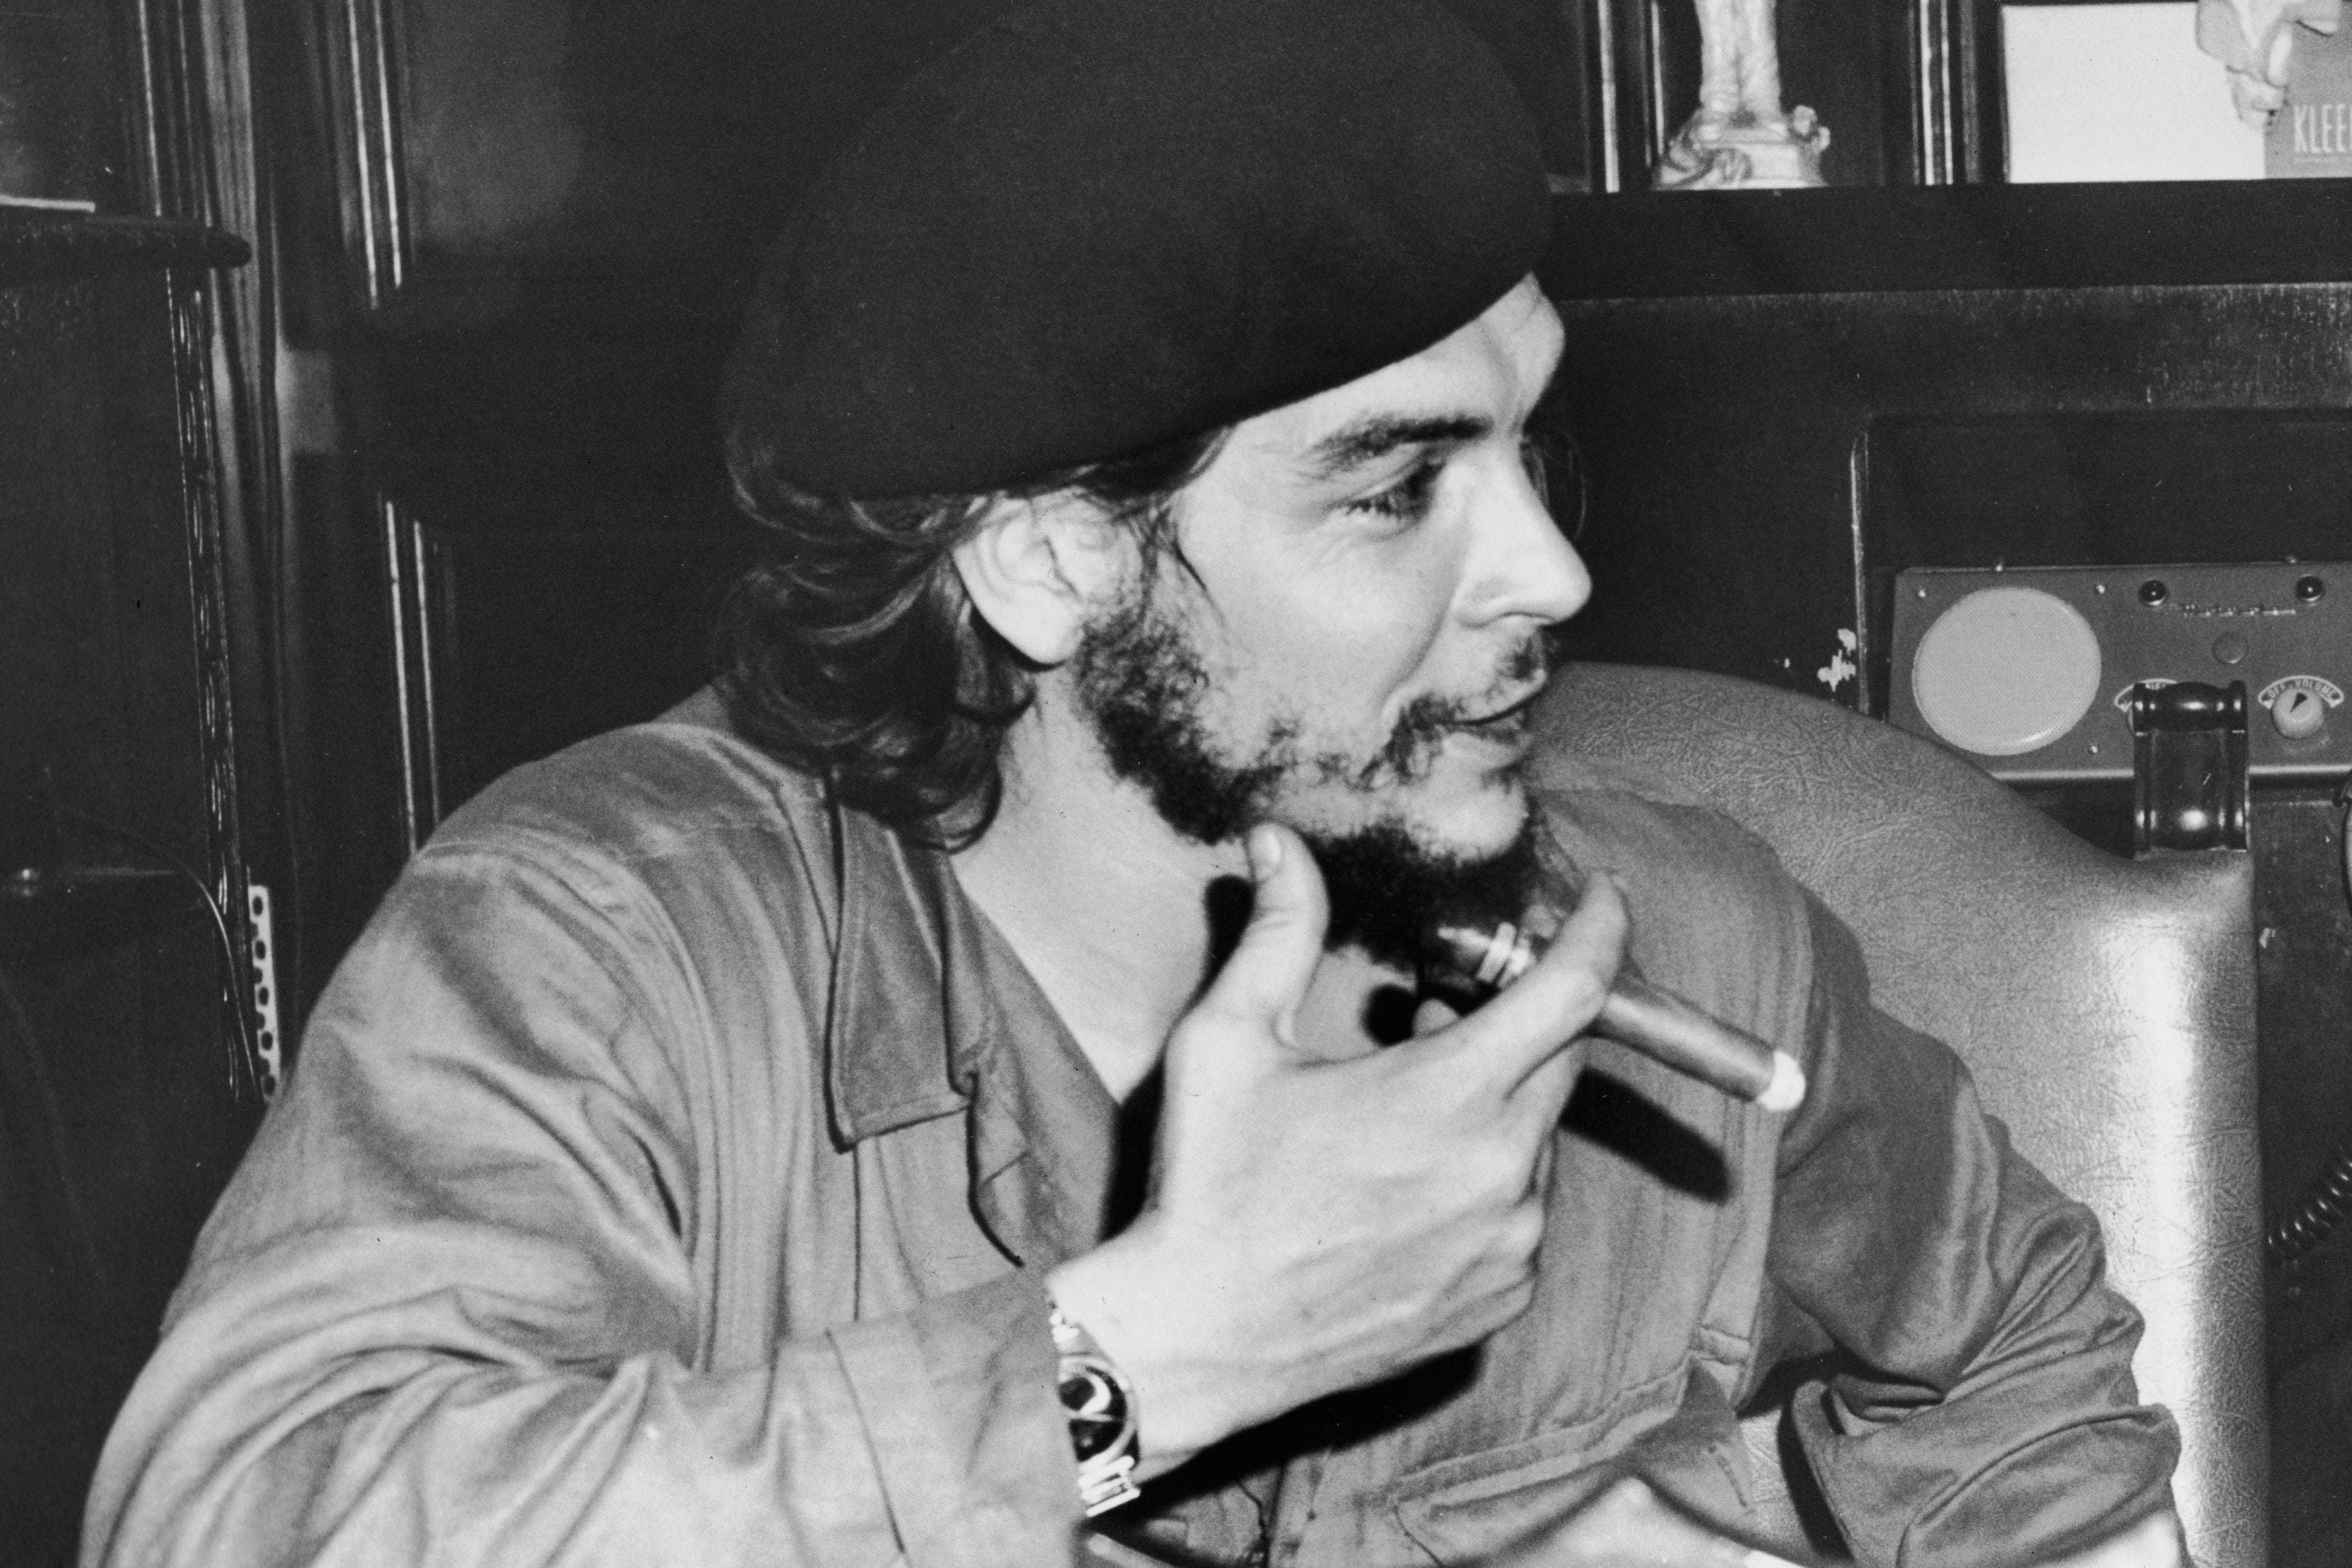 It's over': How I captured Che Guevara